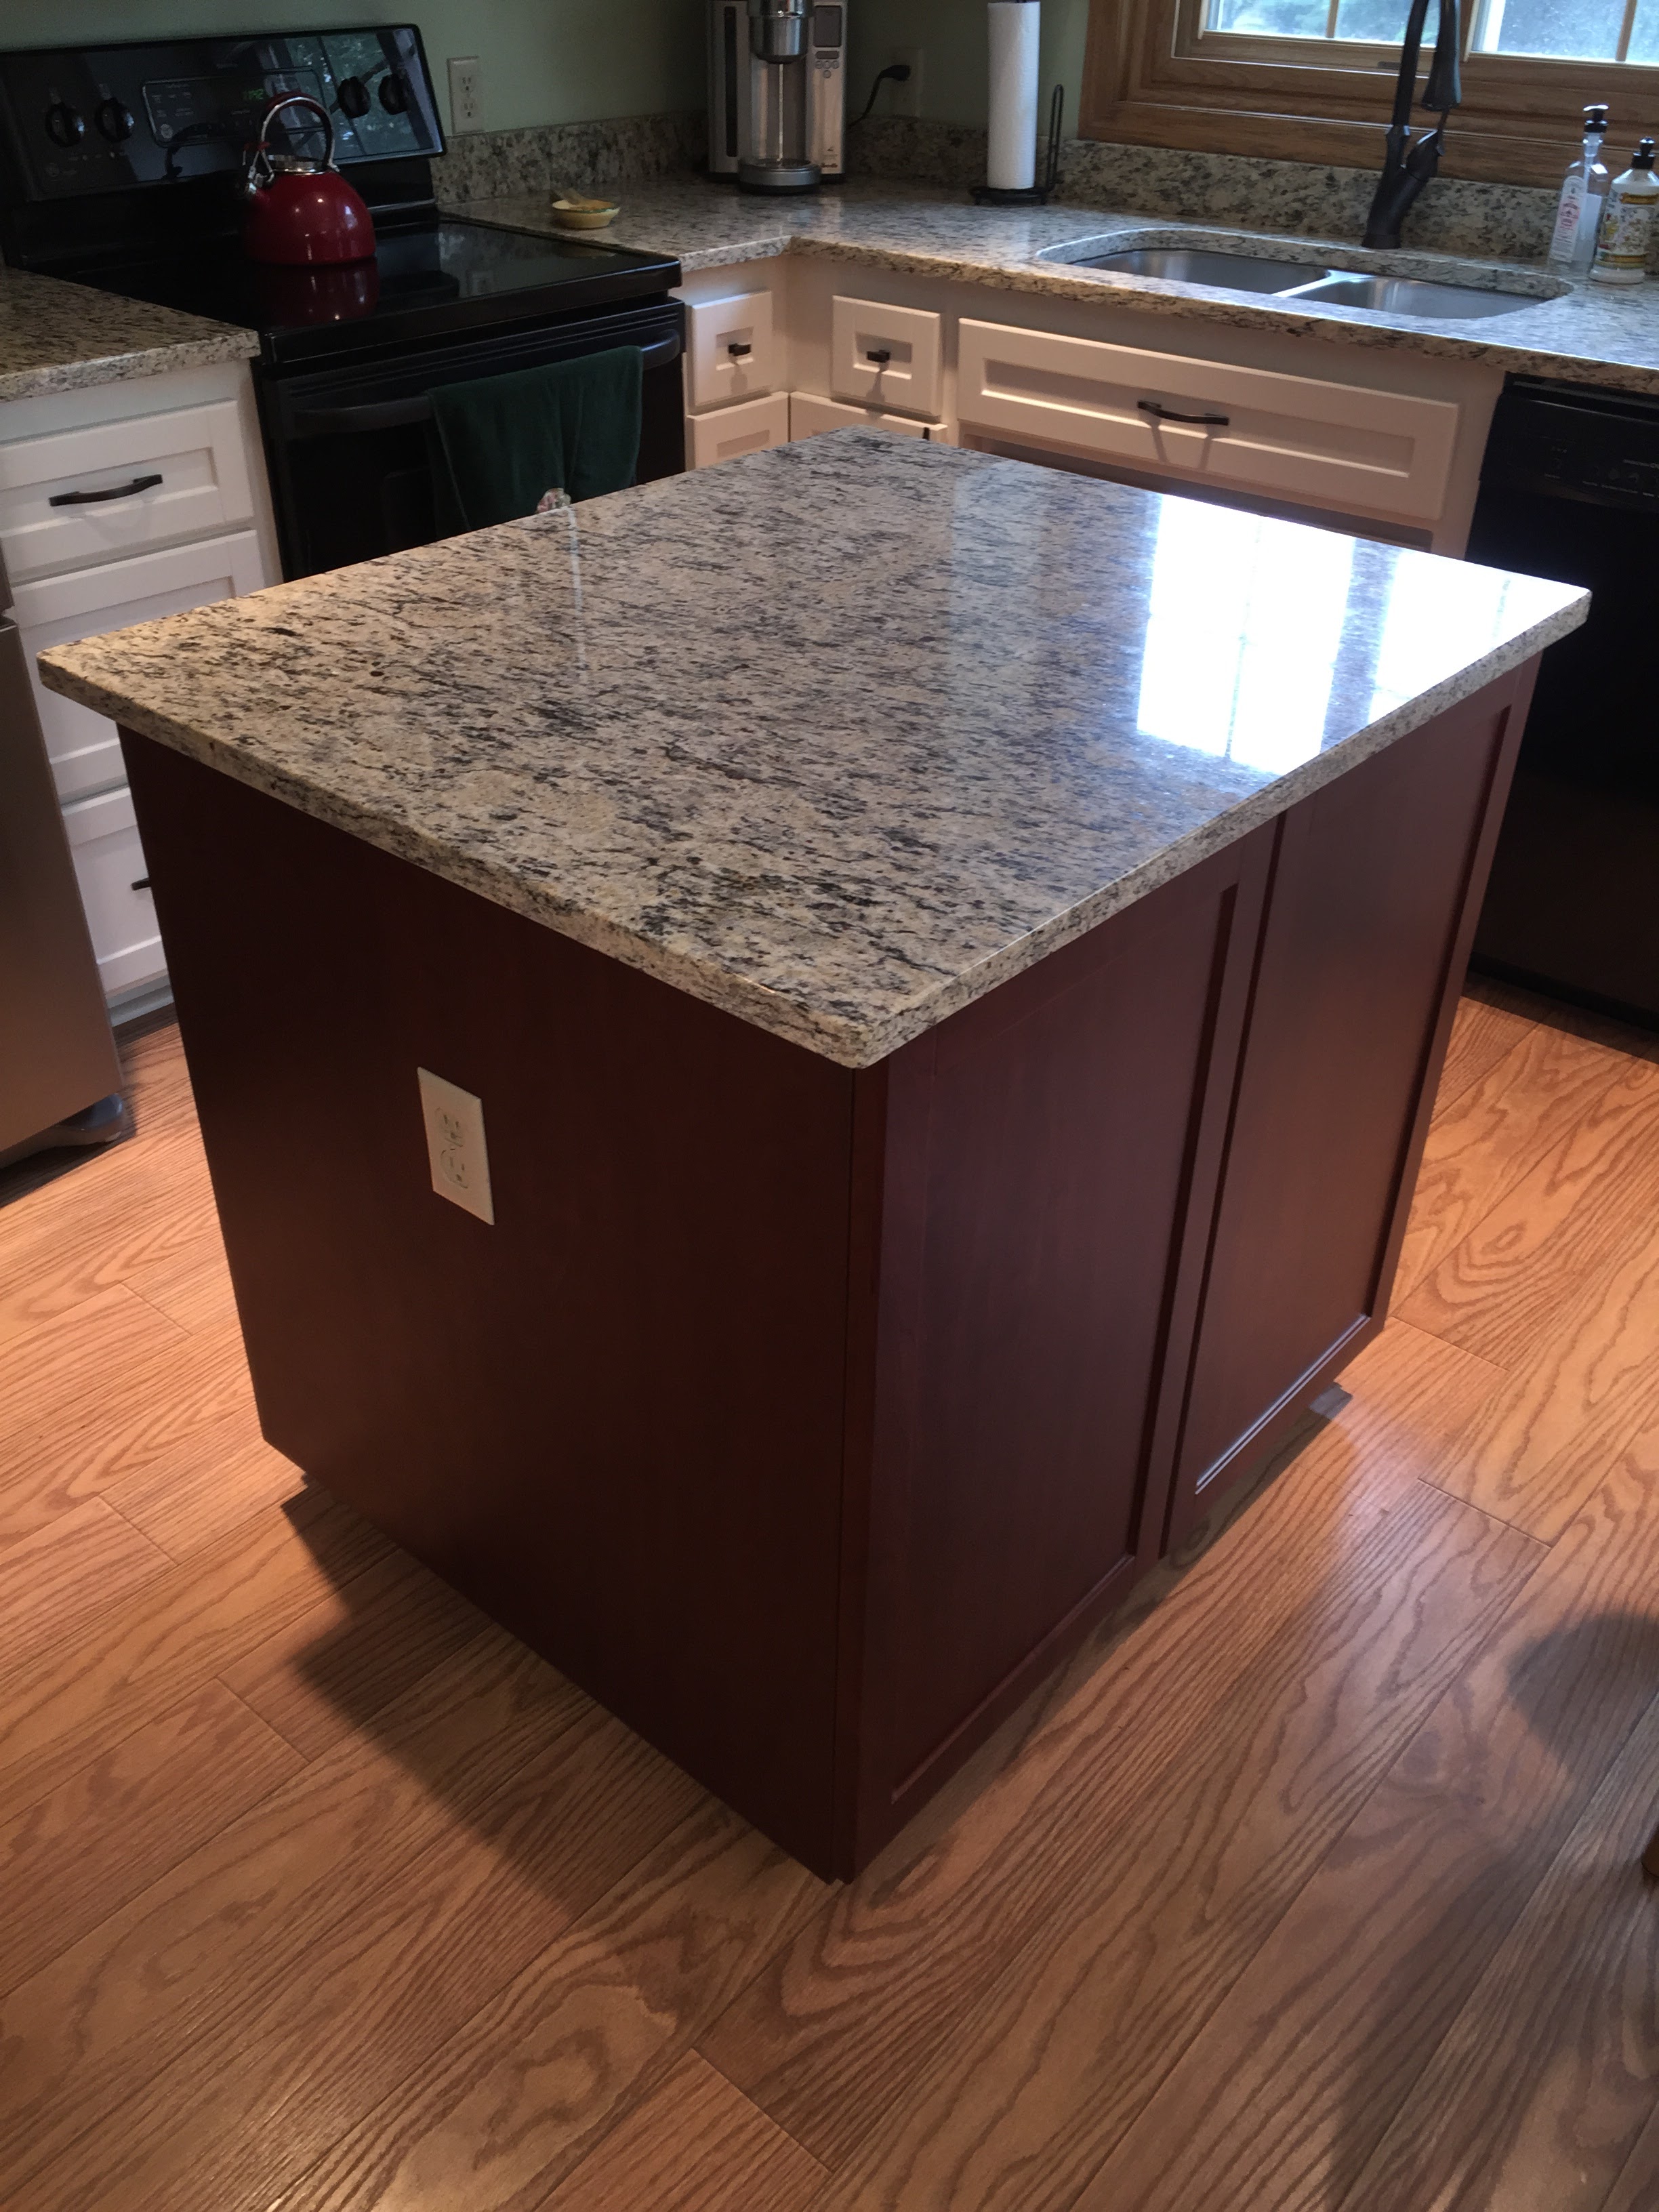 AFTER - New Kitchen Island with Tawney Port finish.  Selecting a contrasting color is a way to give some visual interest to the kitchen and a very modern feel.